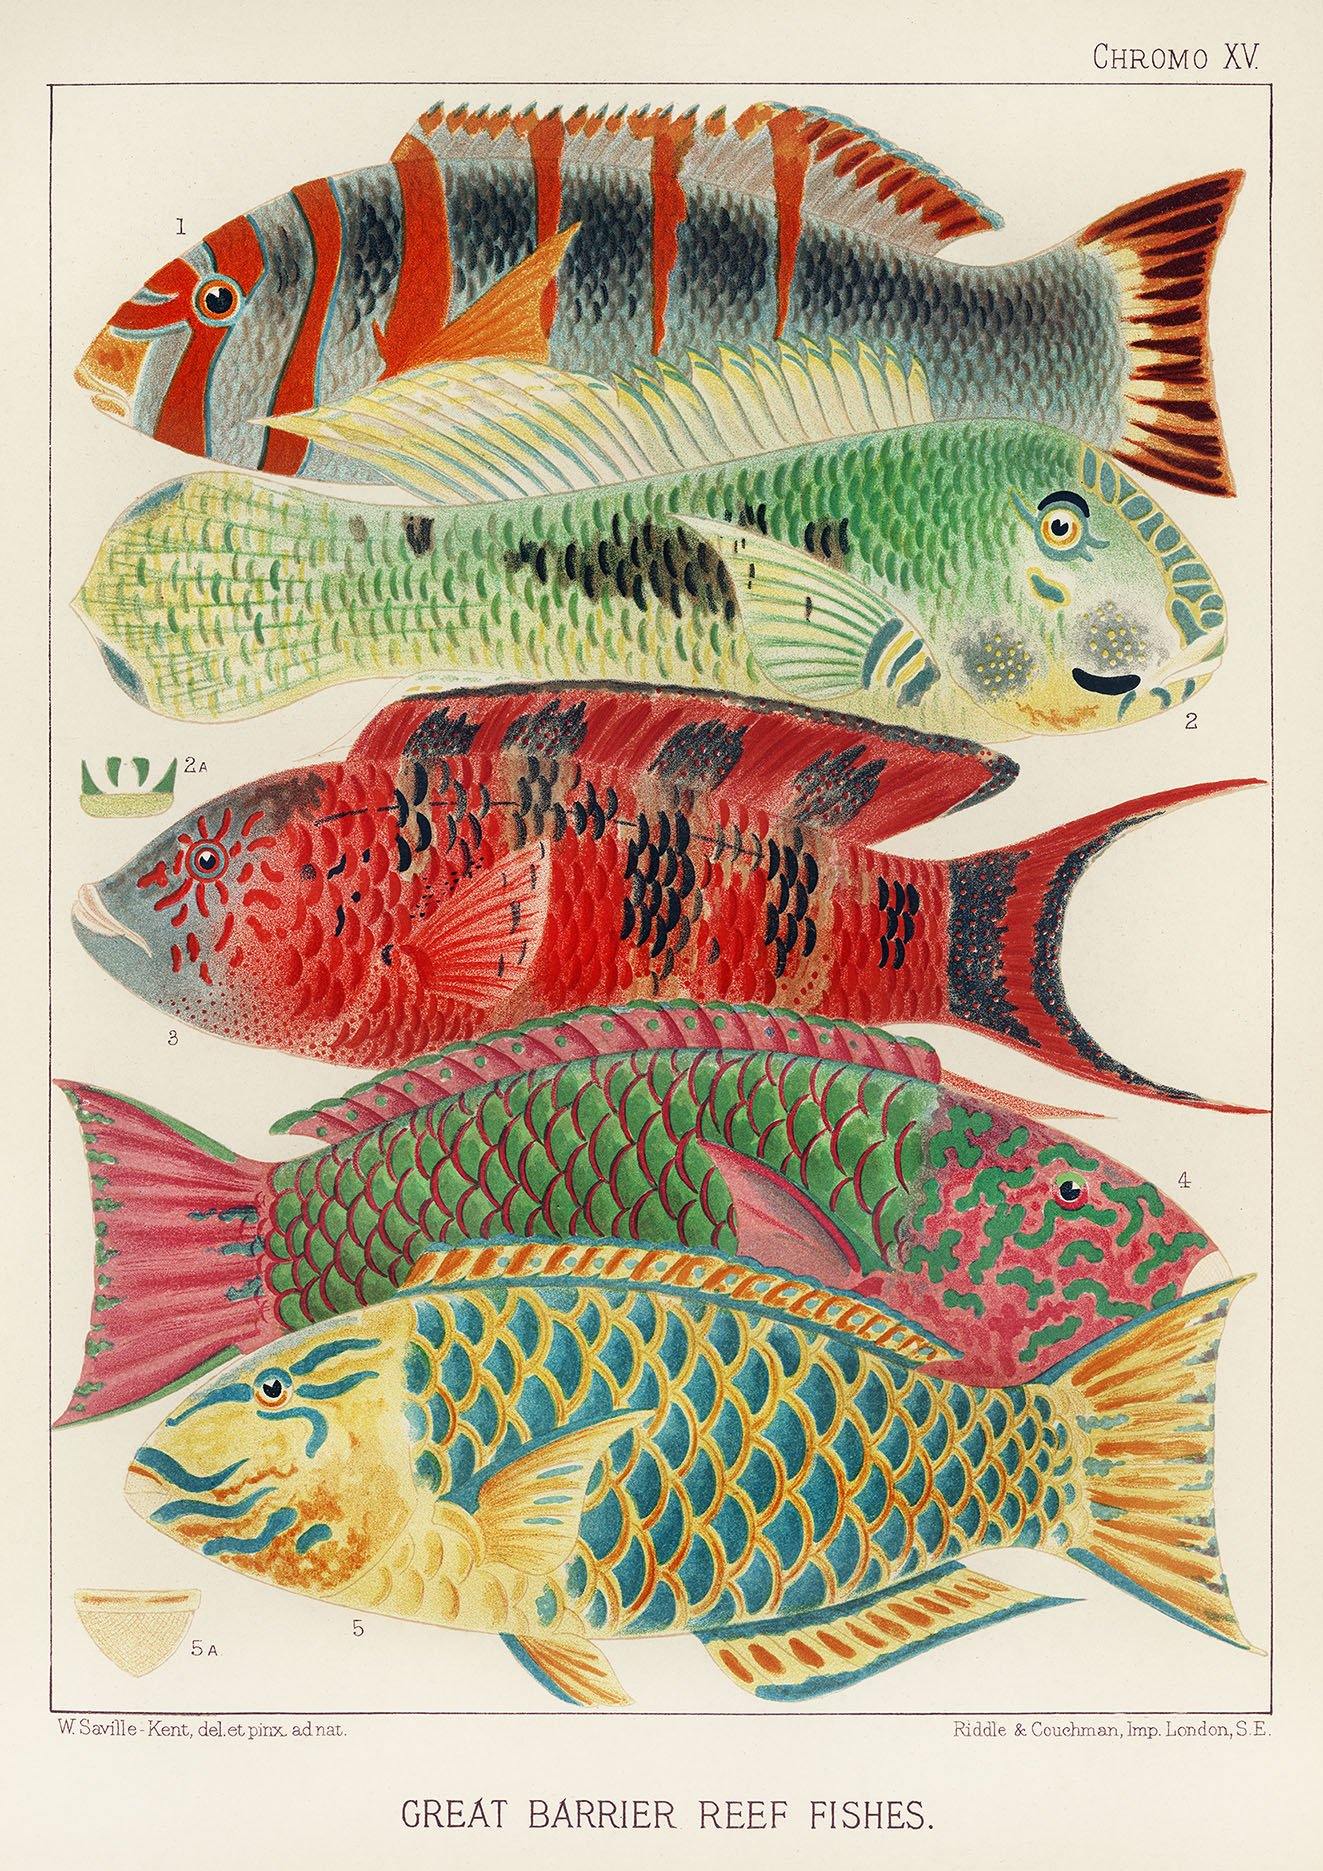 FISH PRINT: Great Barrier Reef Fishes by William Saville-Kent - Pimlico Prints